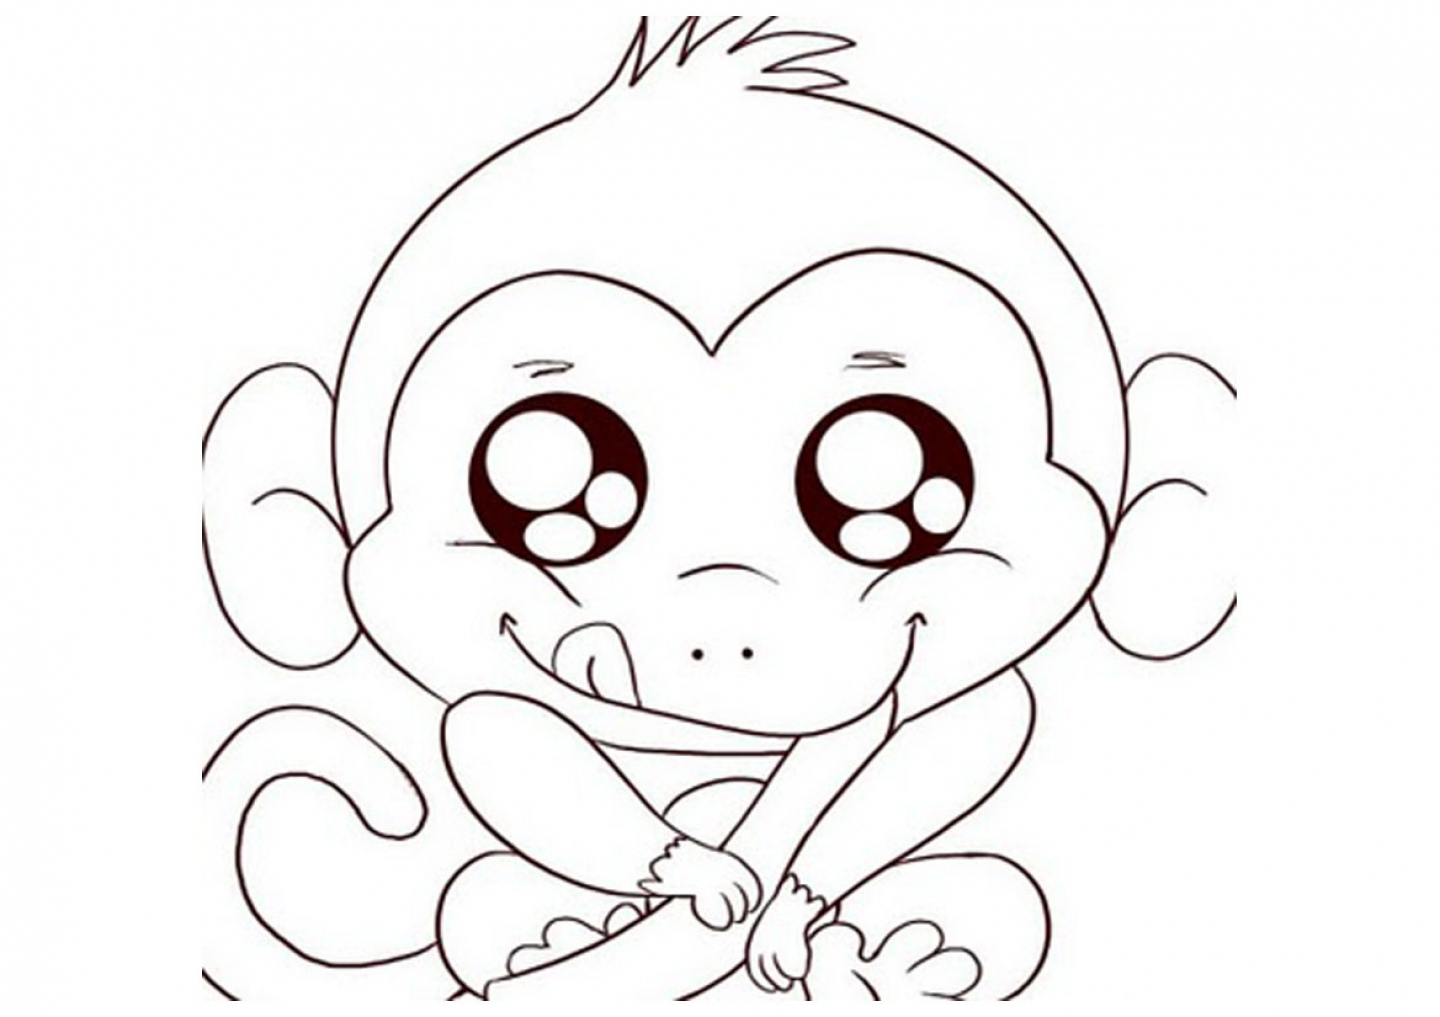 Coloring Pages : Free Printable Monkey Coloring Pages For Kids Pagee - Free Printable Monkey Coloring Sheets